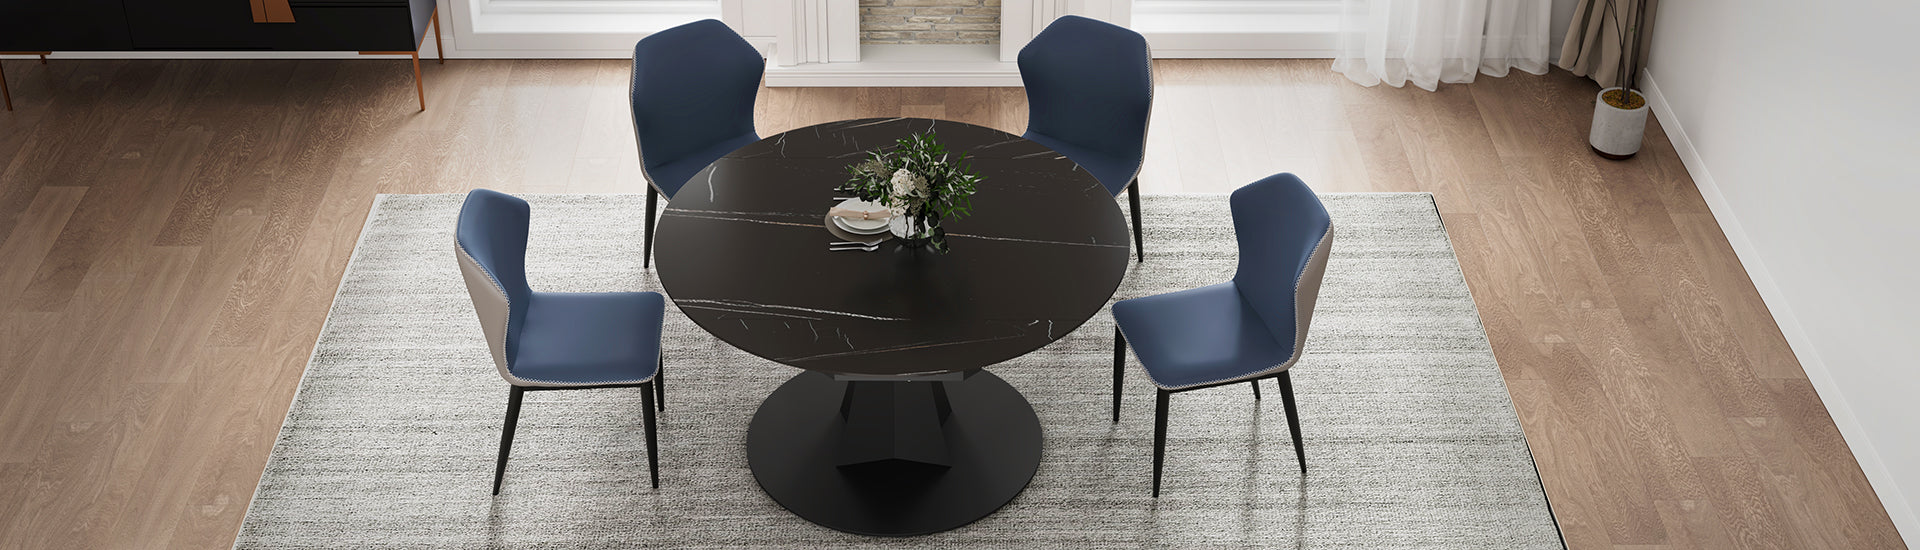 53 inch Black Round Extending Dining Table with Black Base, Clean Lifestyle